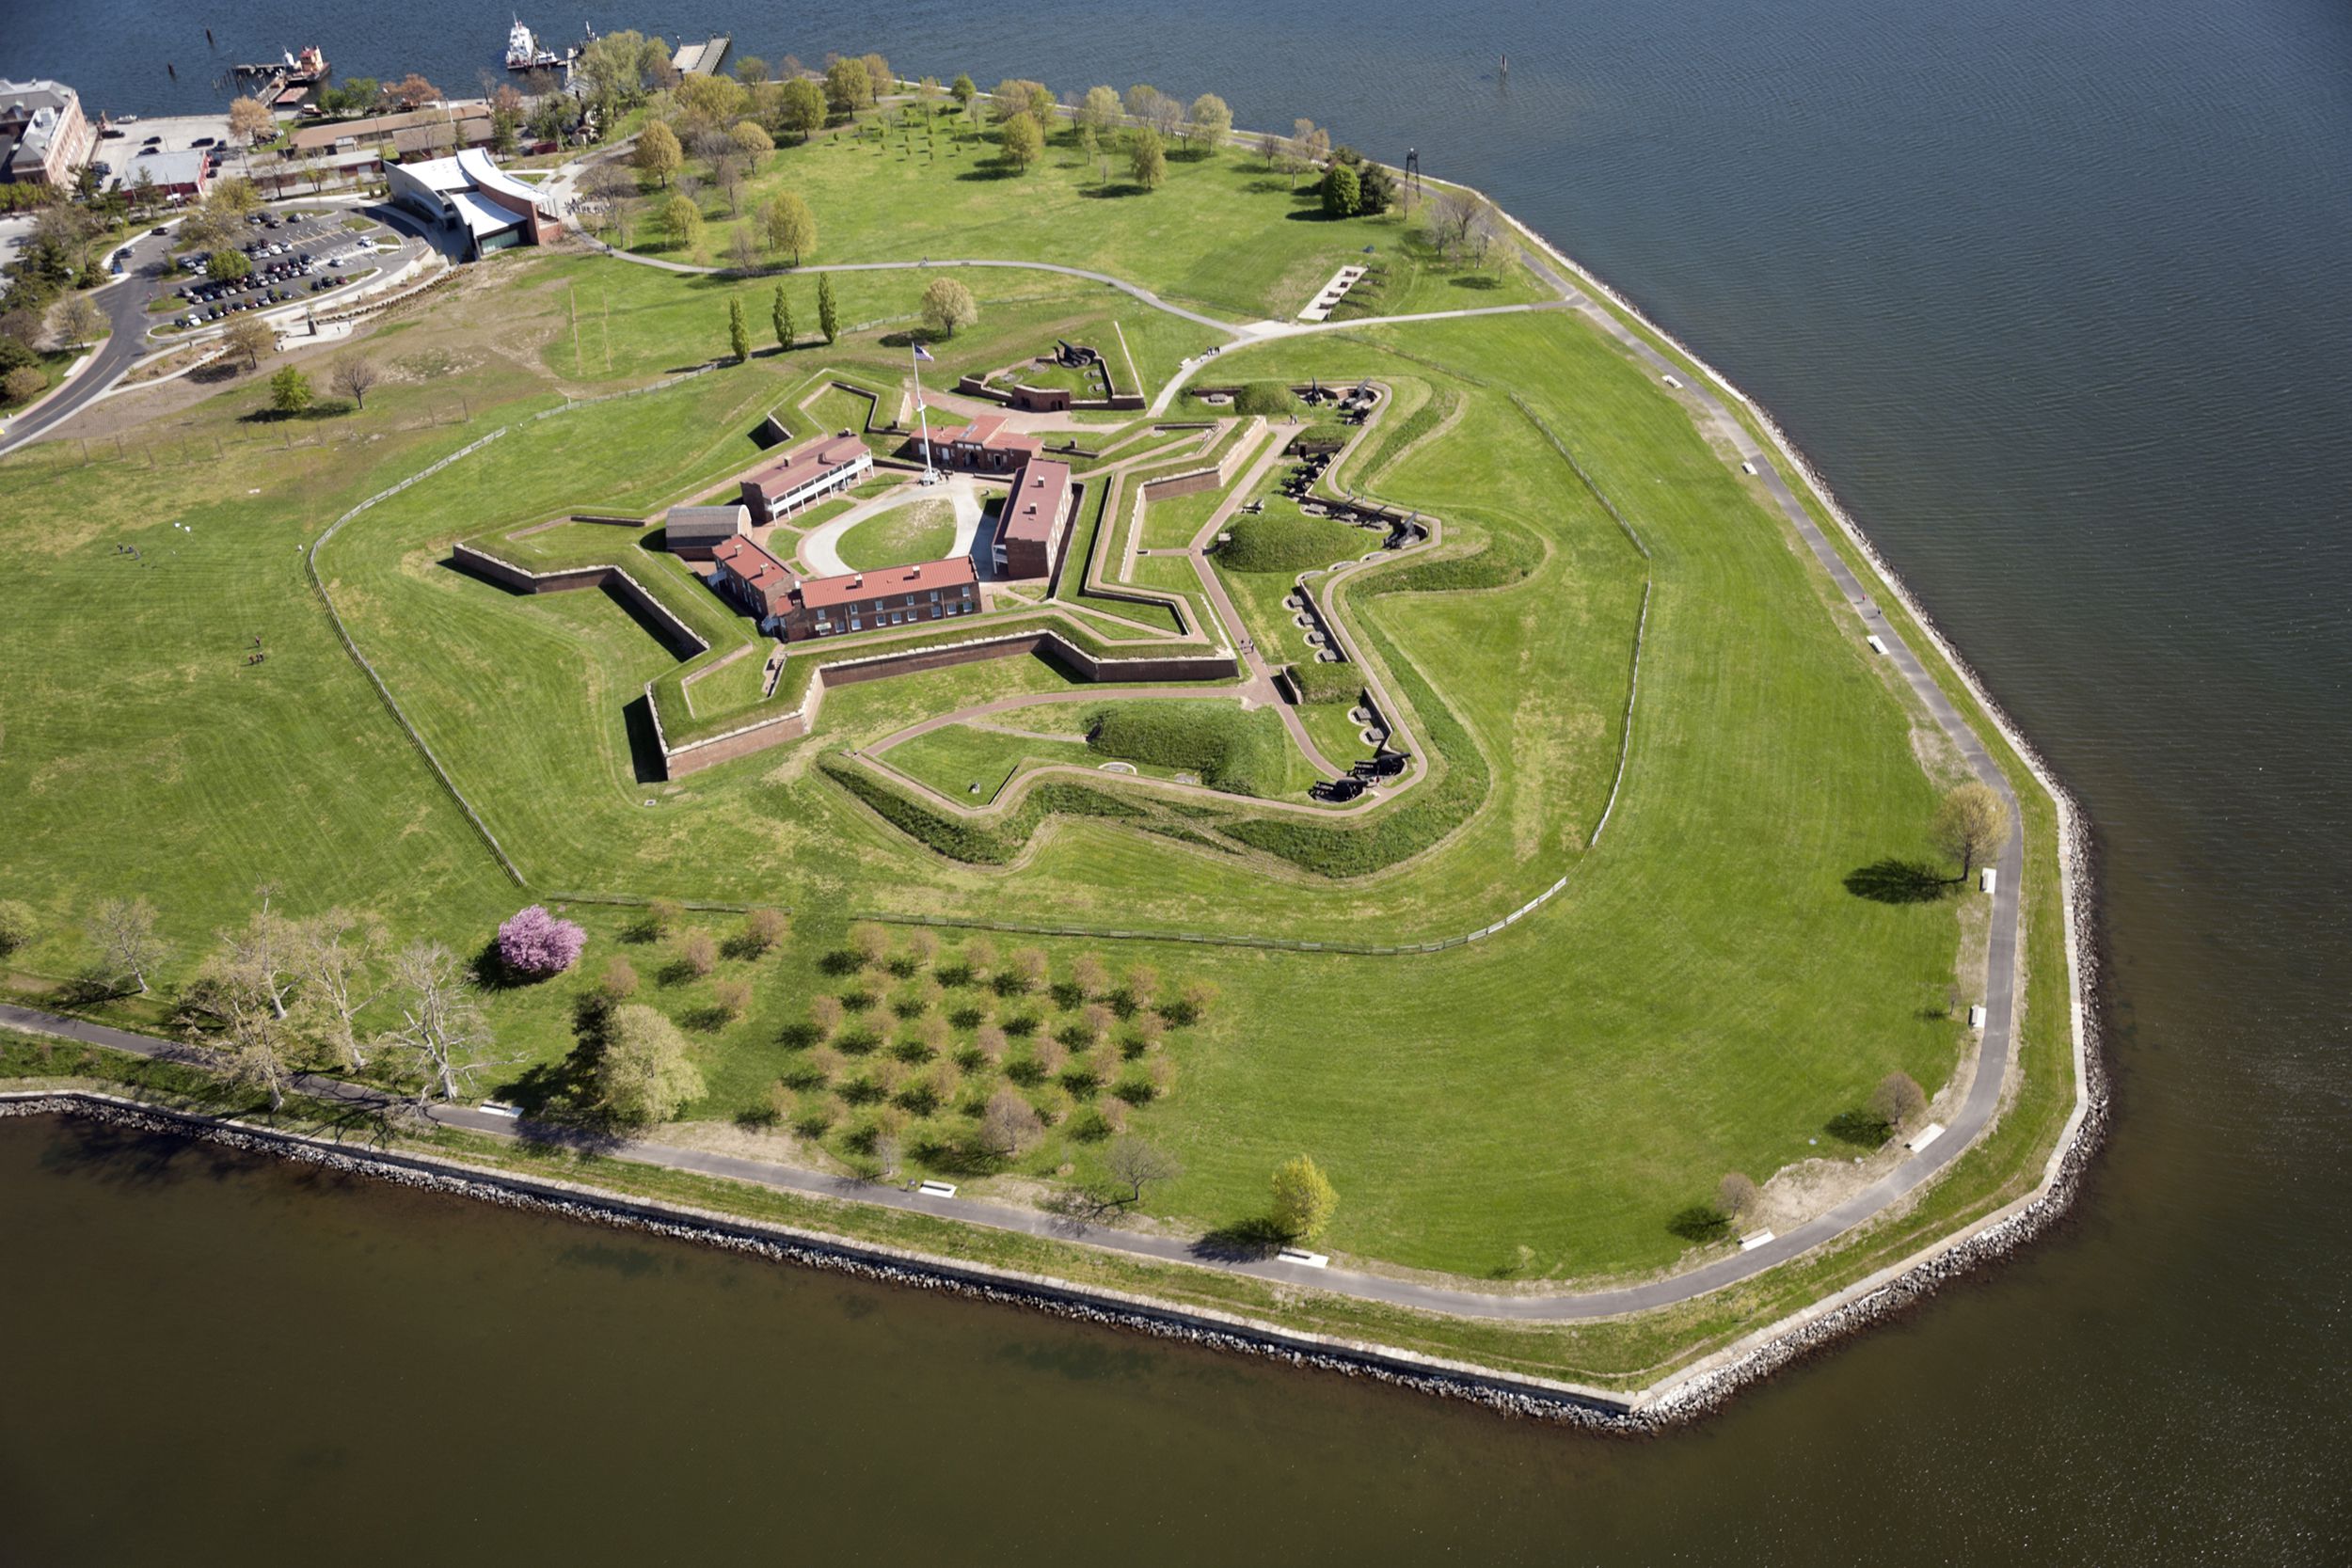 <p>If <a href="https://blog.cheapism.com/best-things-do-baltimore/">you're stopping in Baltimore</a>, don't miss the chance to visit <a href="https://www.nps.gov/fomc/index.htm">Fort McHenry</a>. The inspiration behind "The Star-Spangled Banner," the fort is accessible by public transportation. Entrance is $15 for those 16 or older, and there are free daily ranger talks throughout the day.</p>